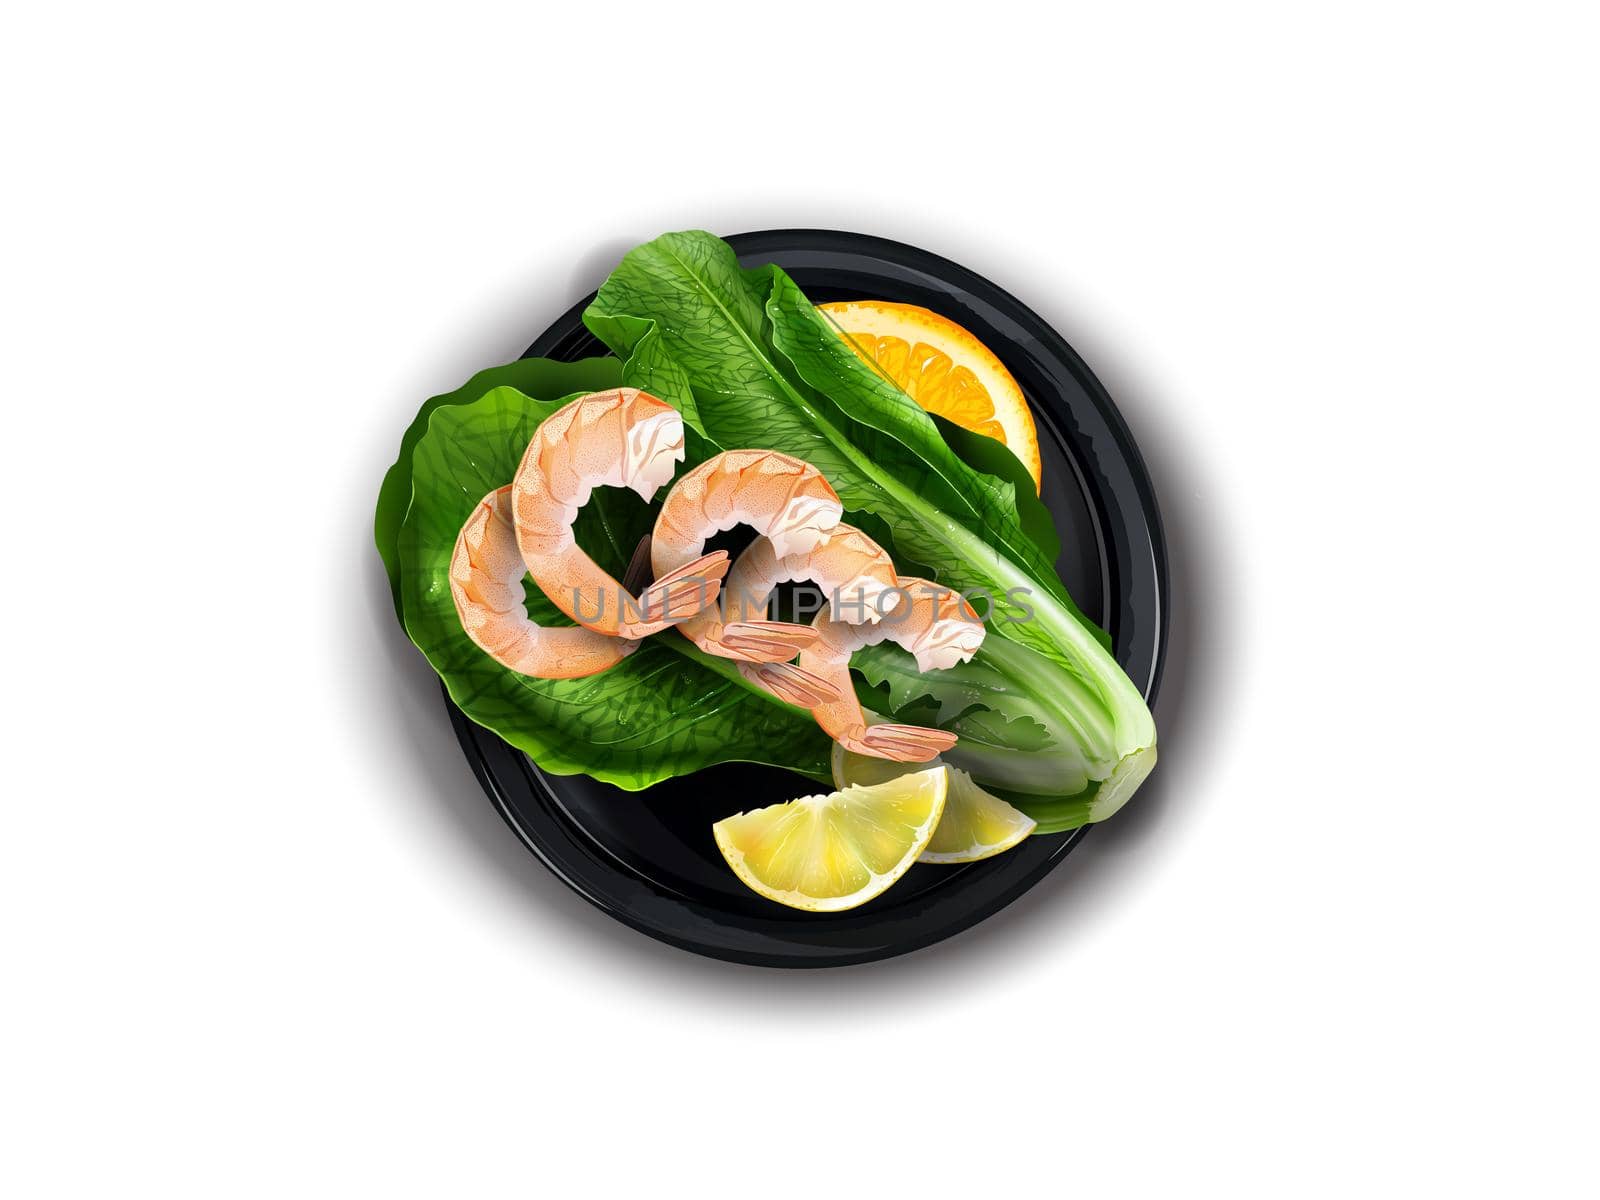 Black plate with shrimps, citrus and lettuce leaves on a white background, top view. Realistic style illustration.